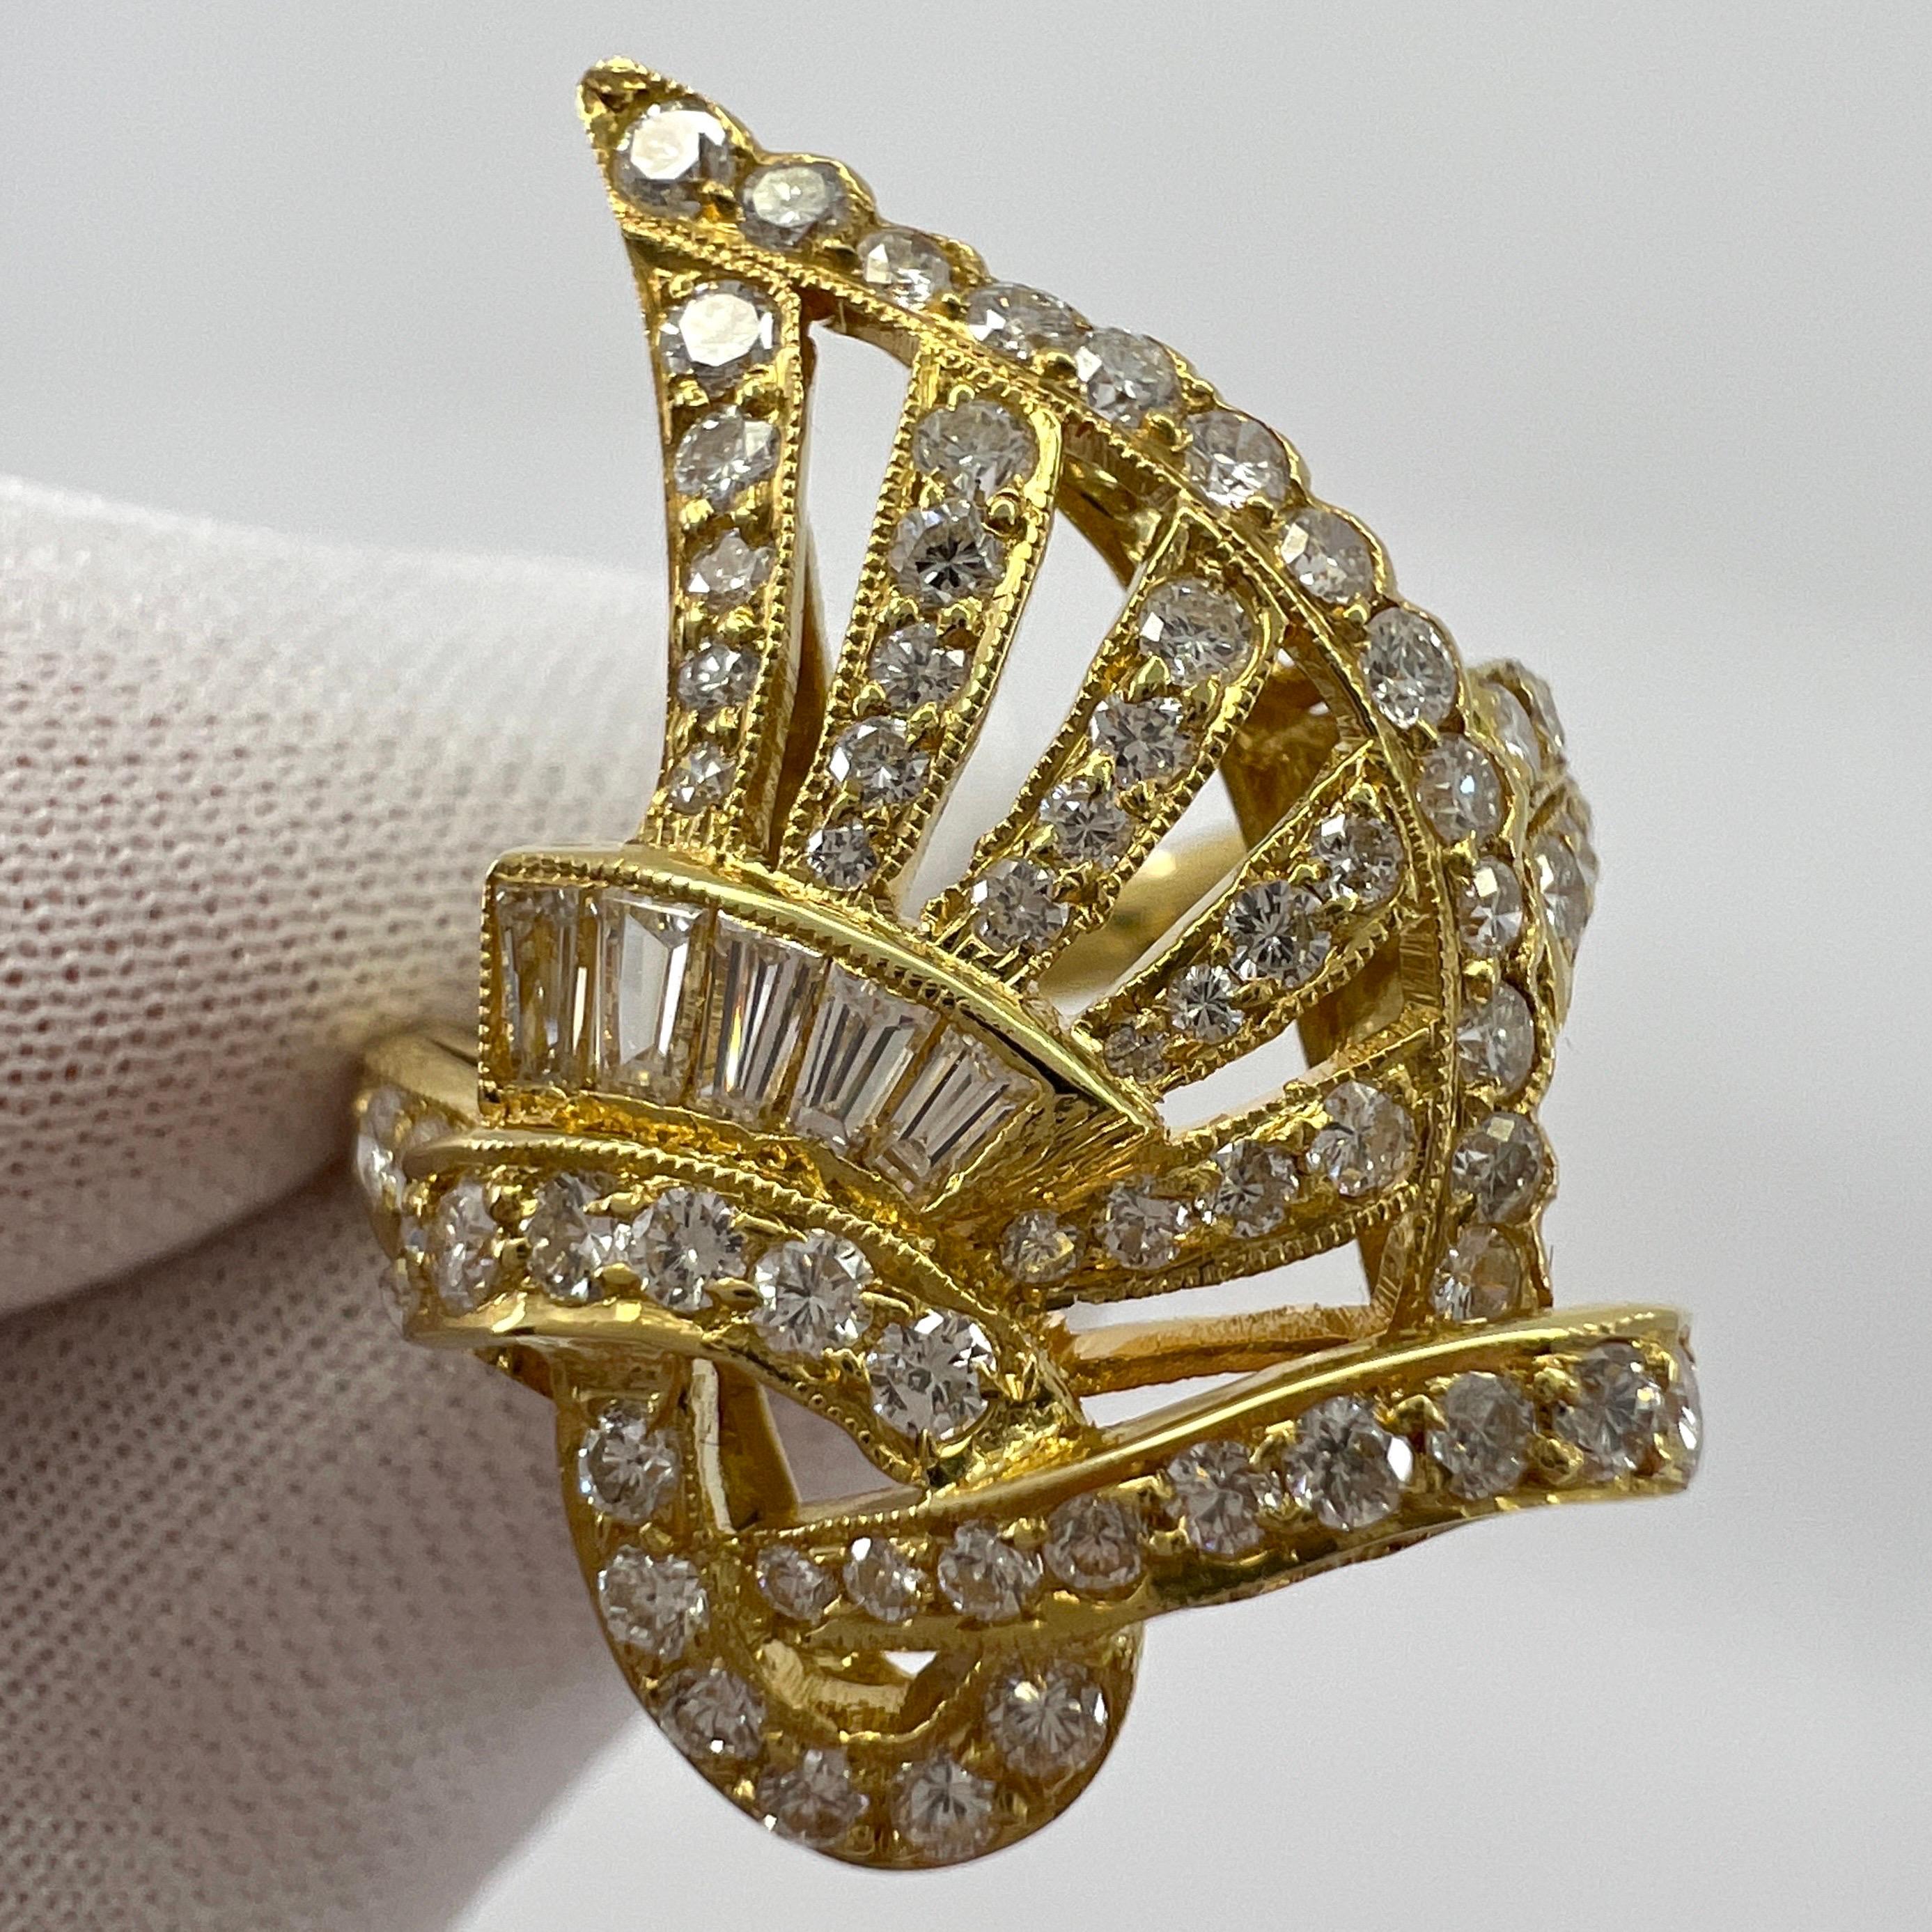 Fancy Natural White Diamond Swirl Round & Baguette Cut 18k Yellow Gold Fancy Statement Ring.

1.26 Carat of diamonds set in a beautifully crafted fancy swirl design ring. A bold and bright statement piece.

1.08ct of round brilliant diamonds and